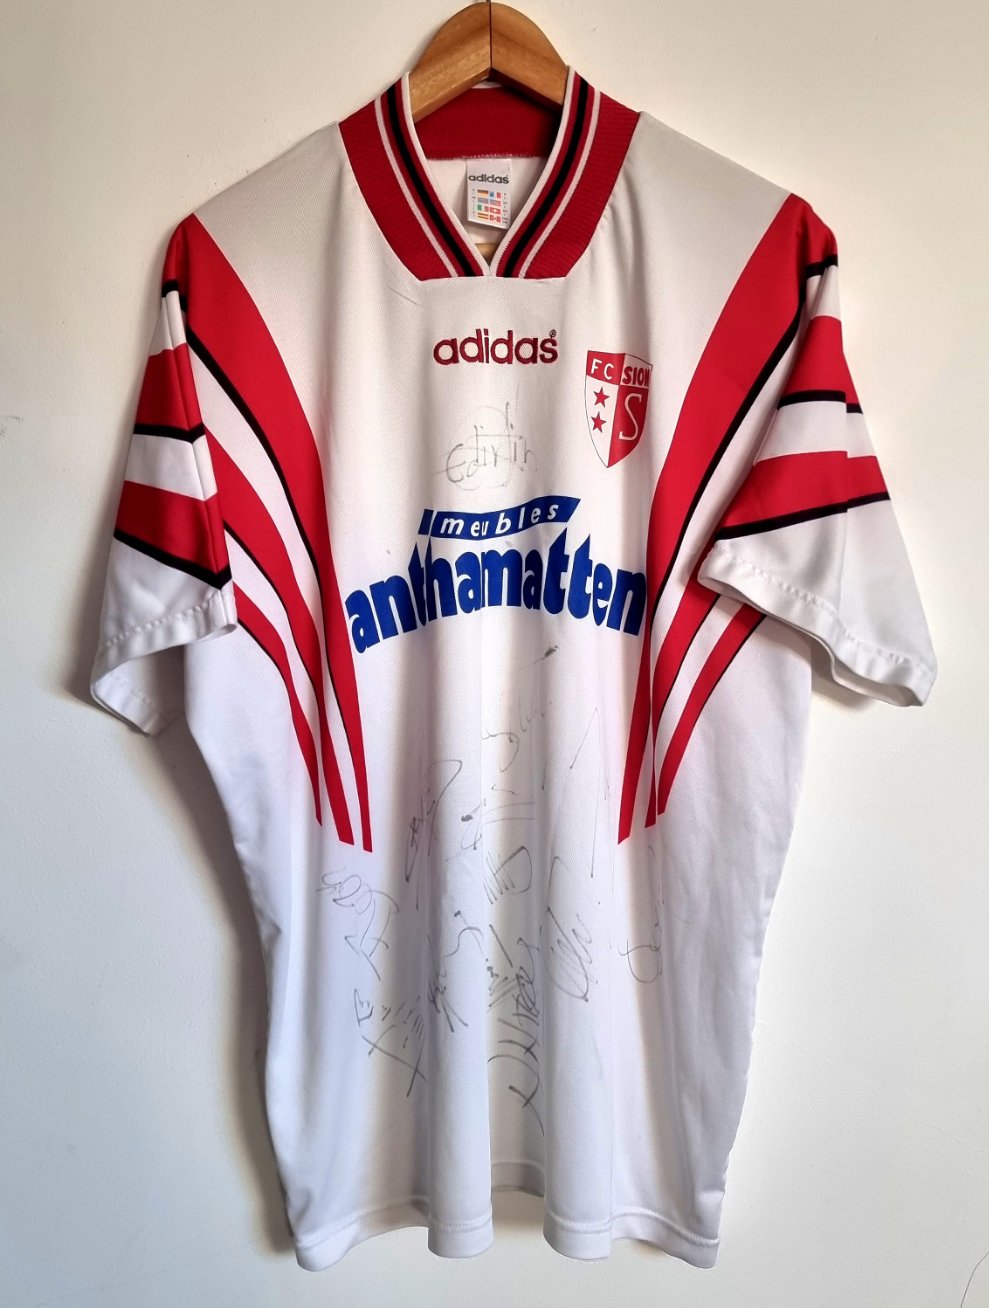 Adidas FC Sion 96/97 Signed Home Shirt Large